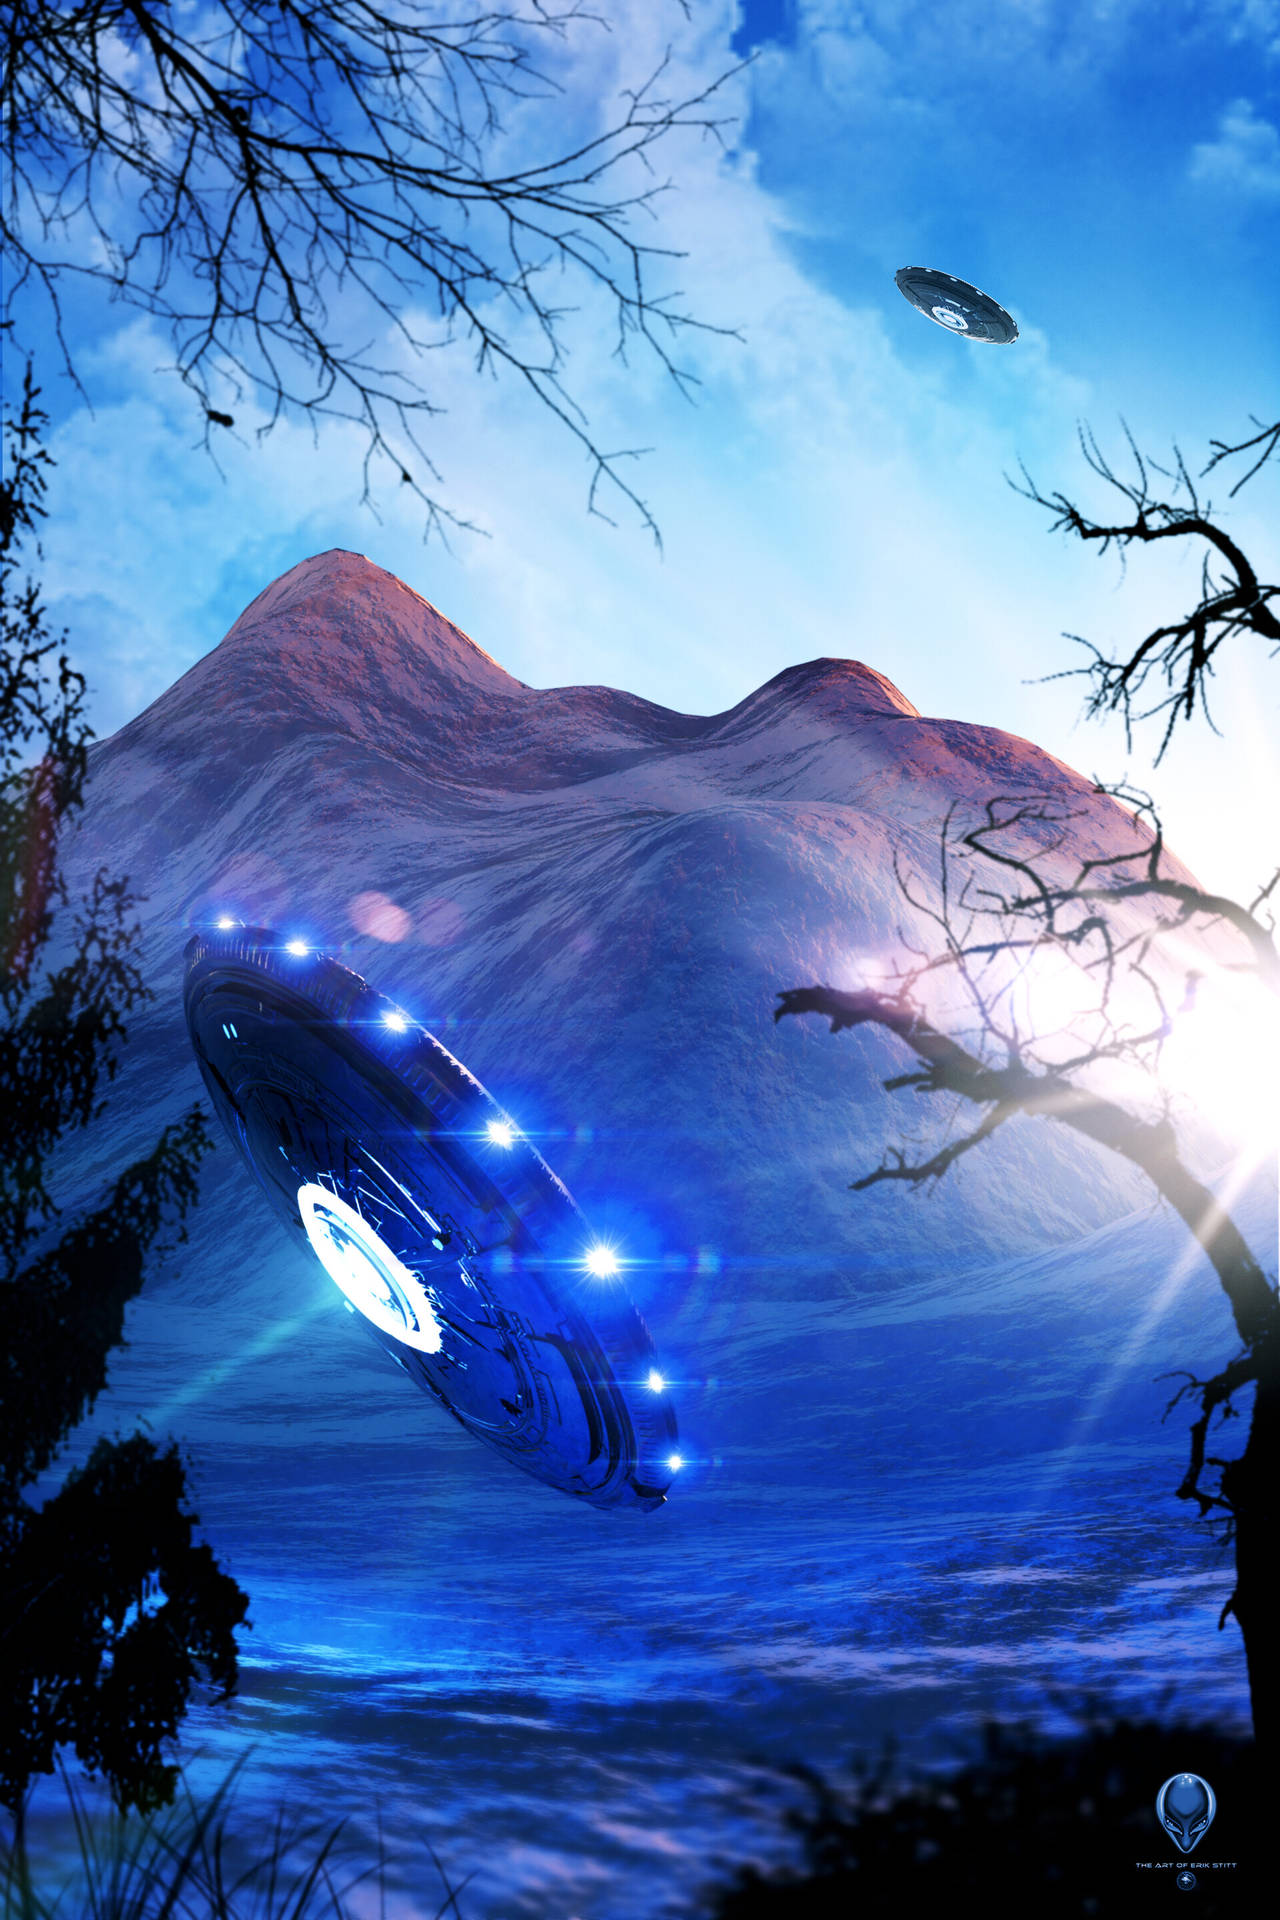 Alien Ship On The Mountain Background